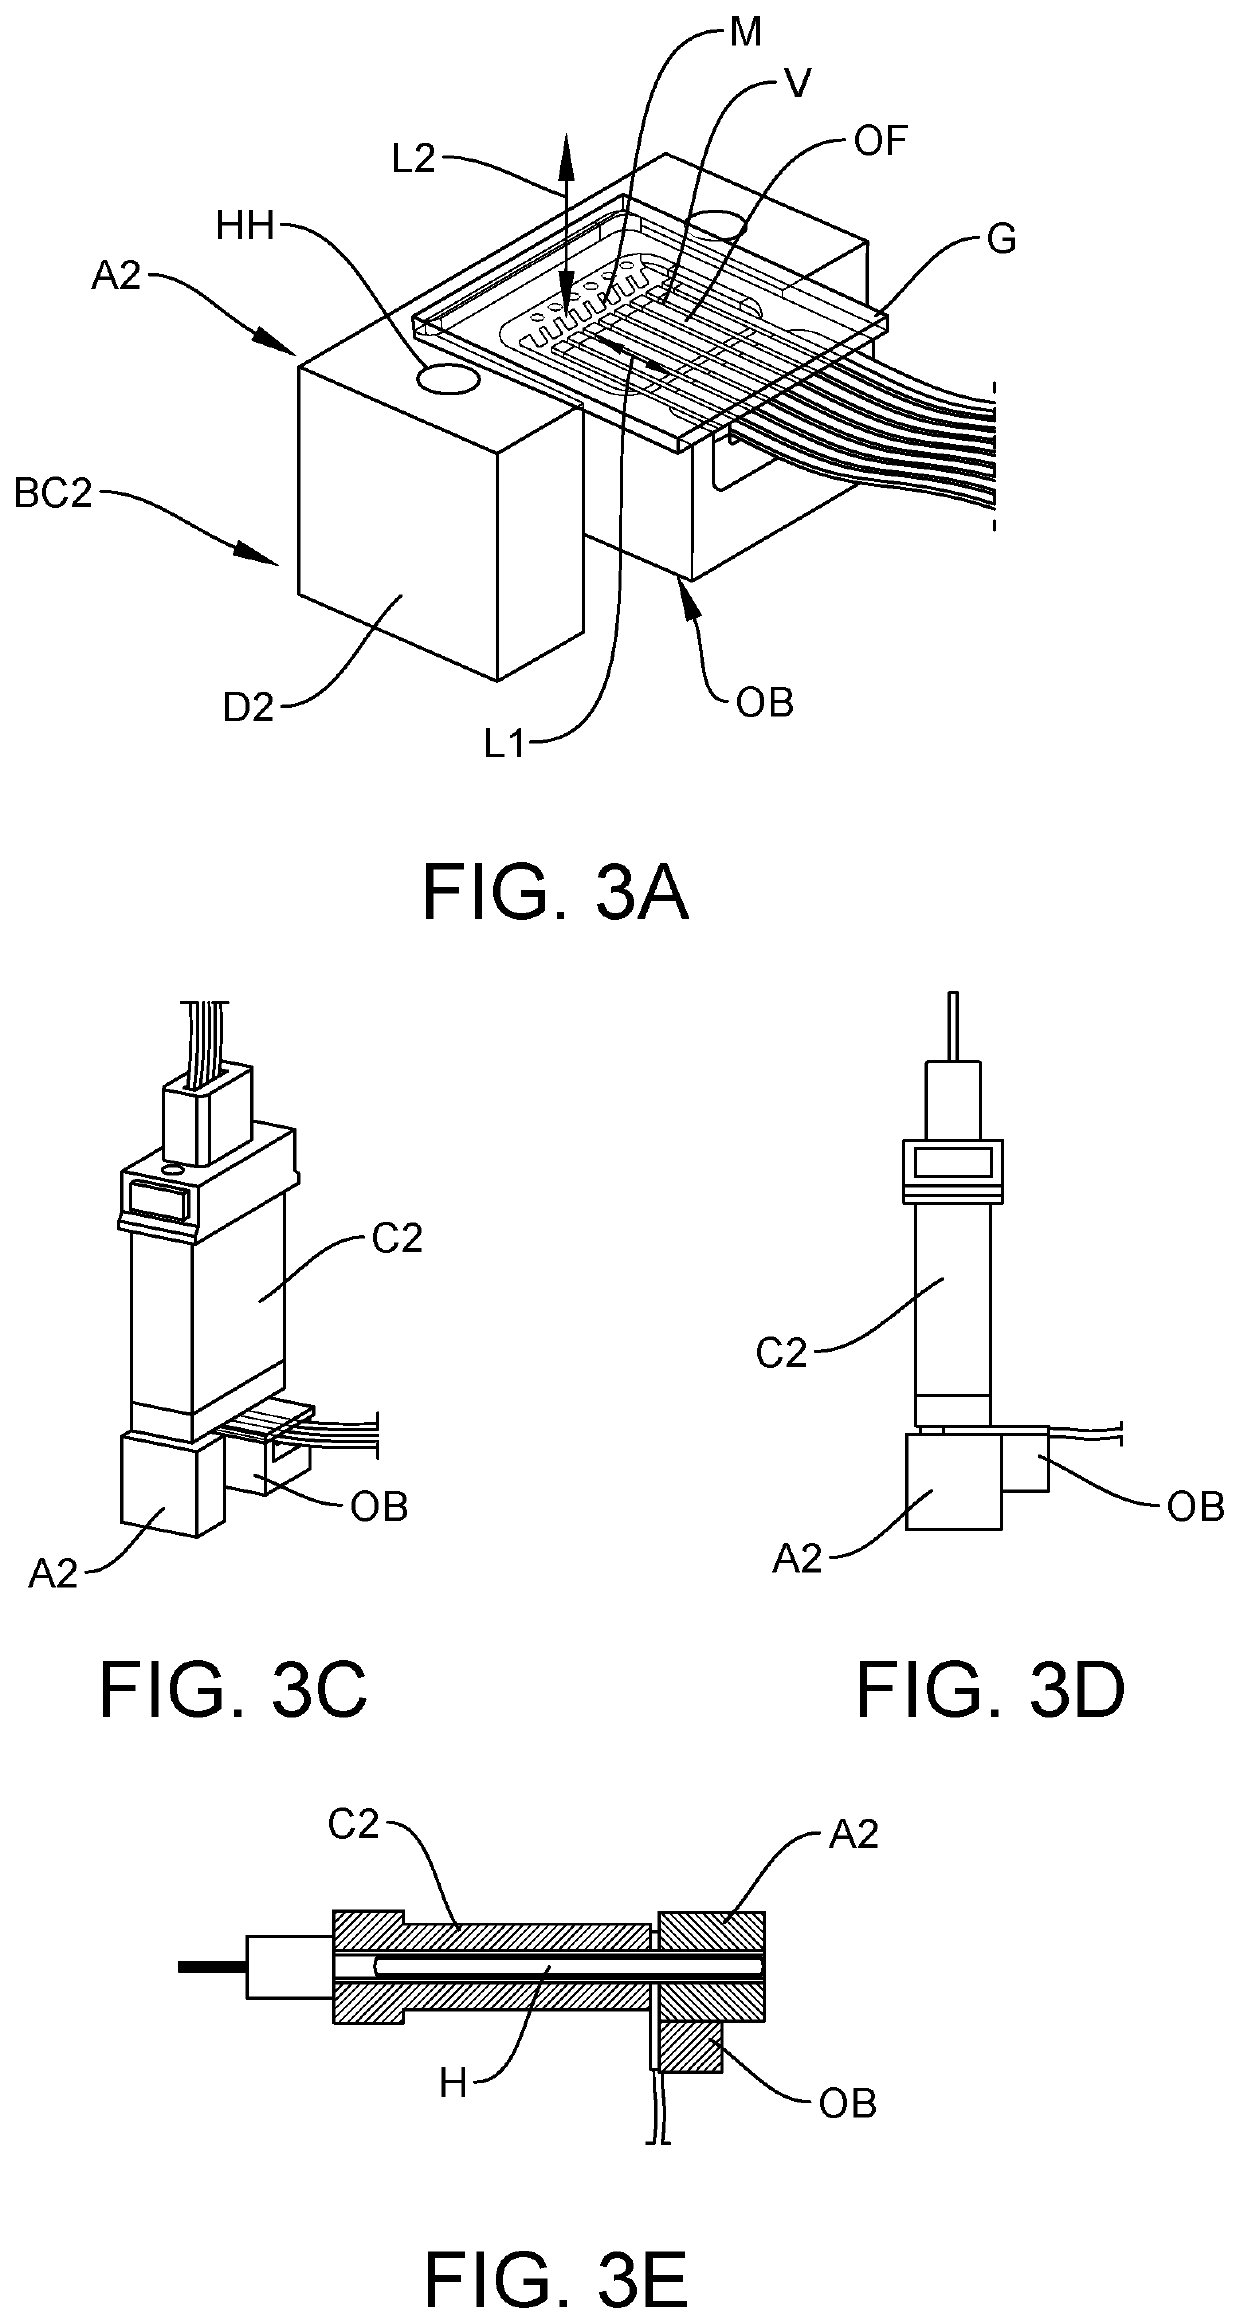 Demountable connection of an optical connector and an optical bench based connector using an alignment coupler